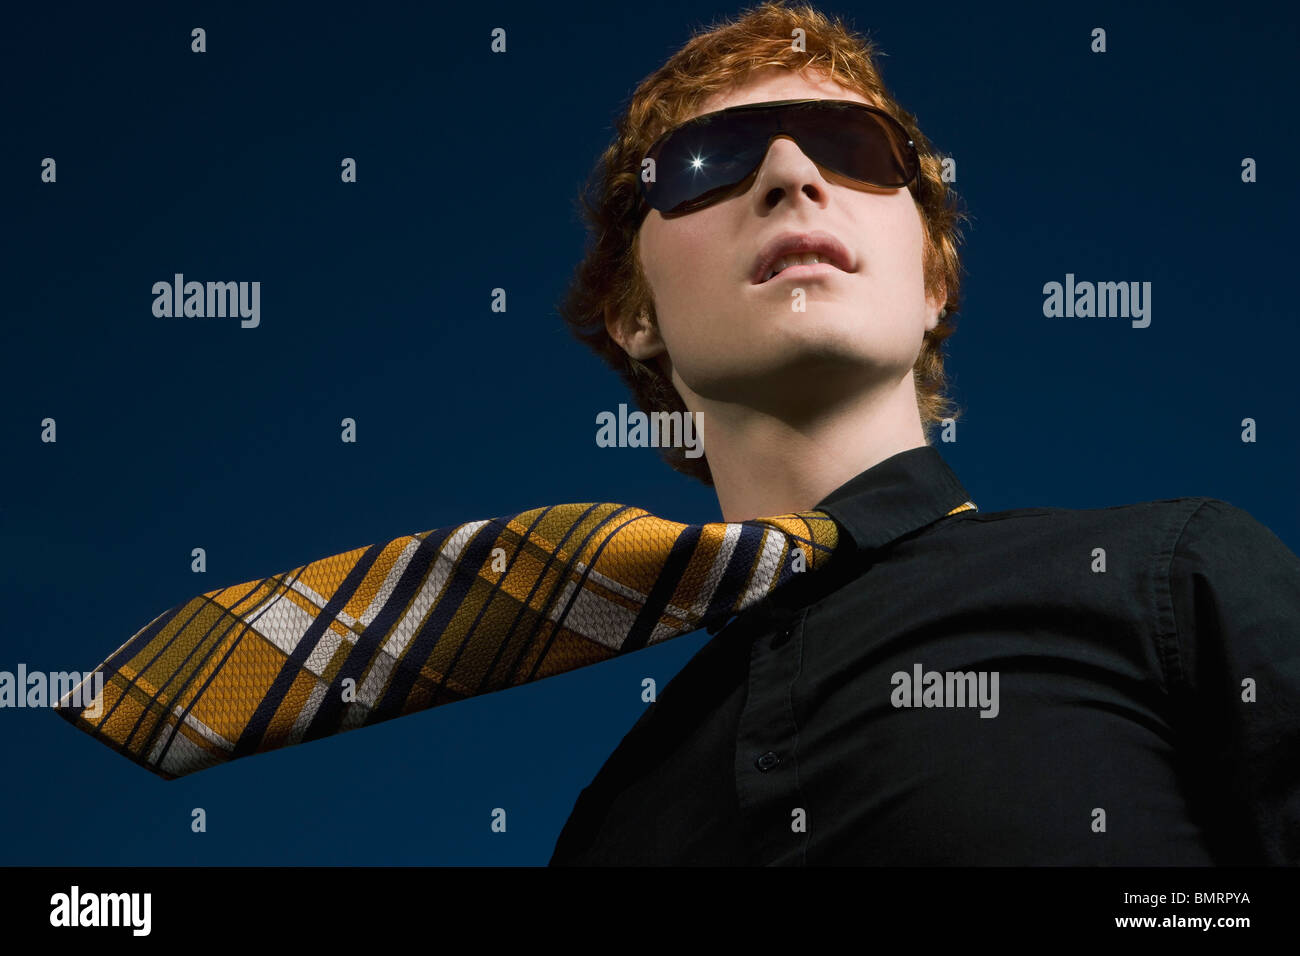 A Young Man Wearing Sunglasses And A Necktie Stock Photo